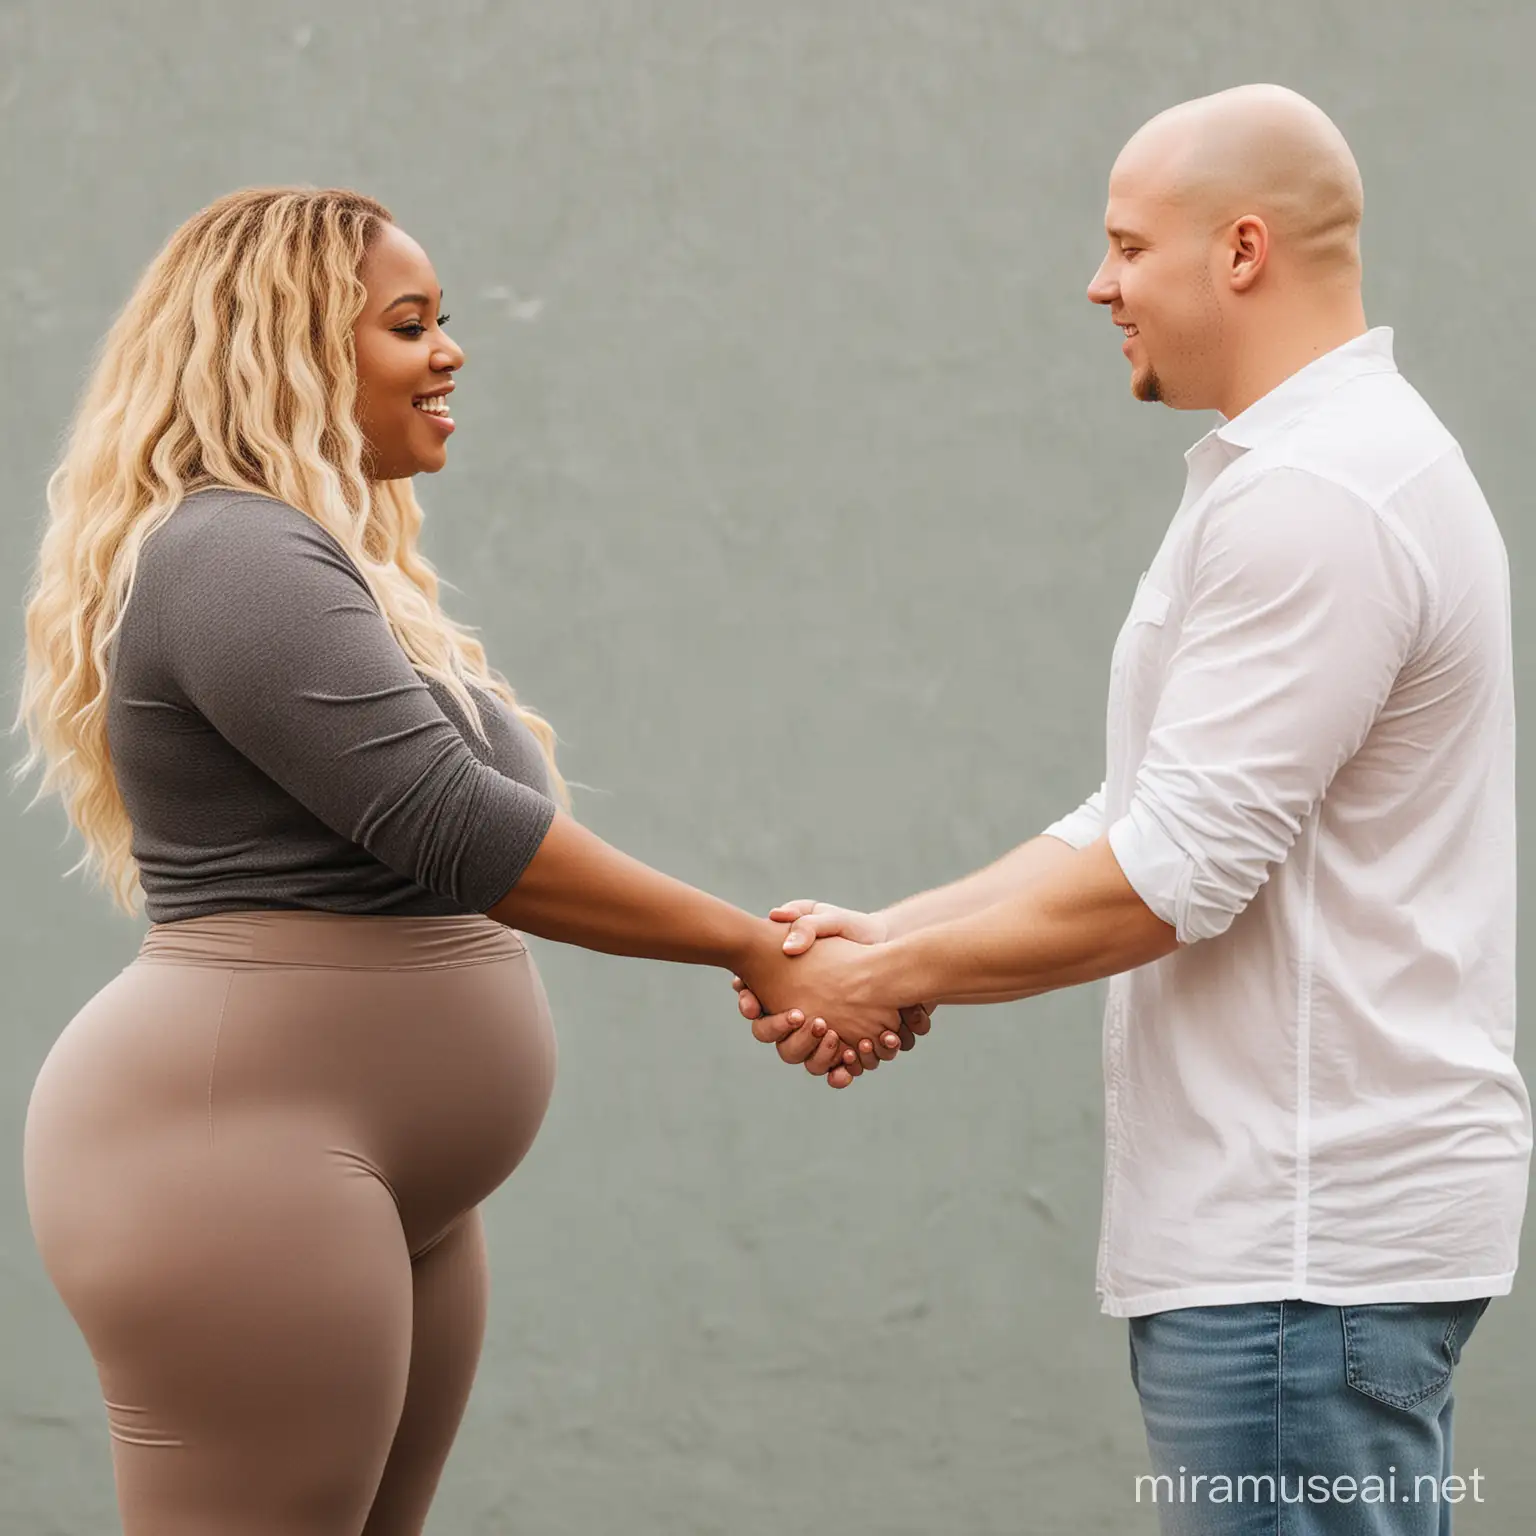 Jessica a slightly overweight black woman with long blonde hair, Tim a bald fit white guy. Holding hands and in love with each other